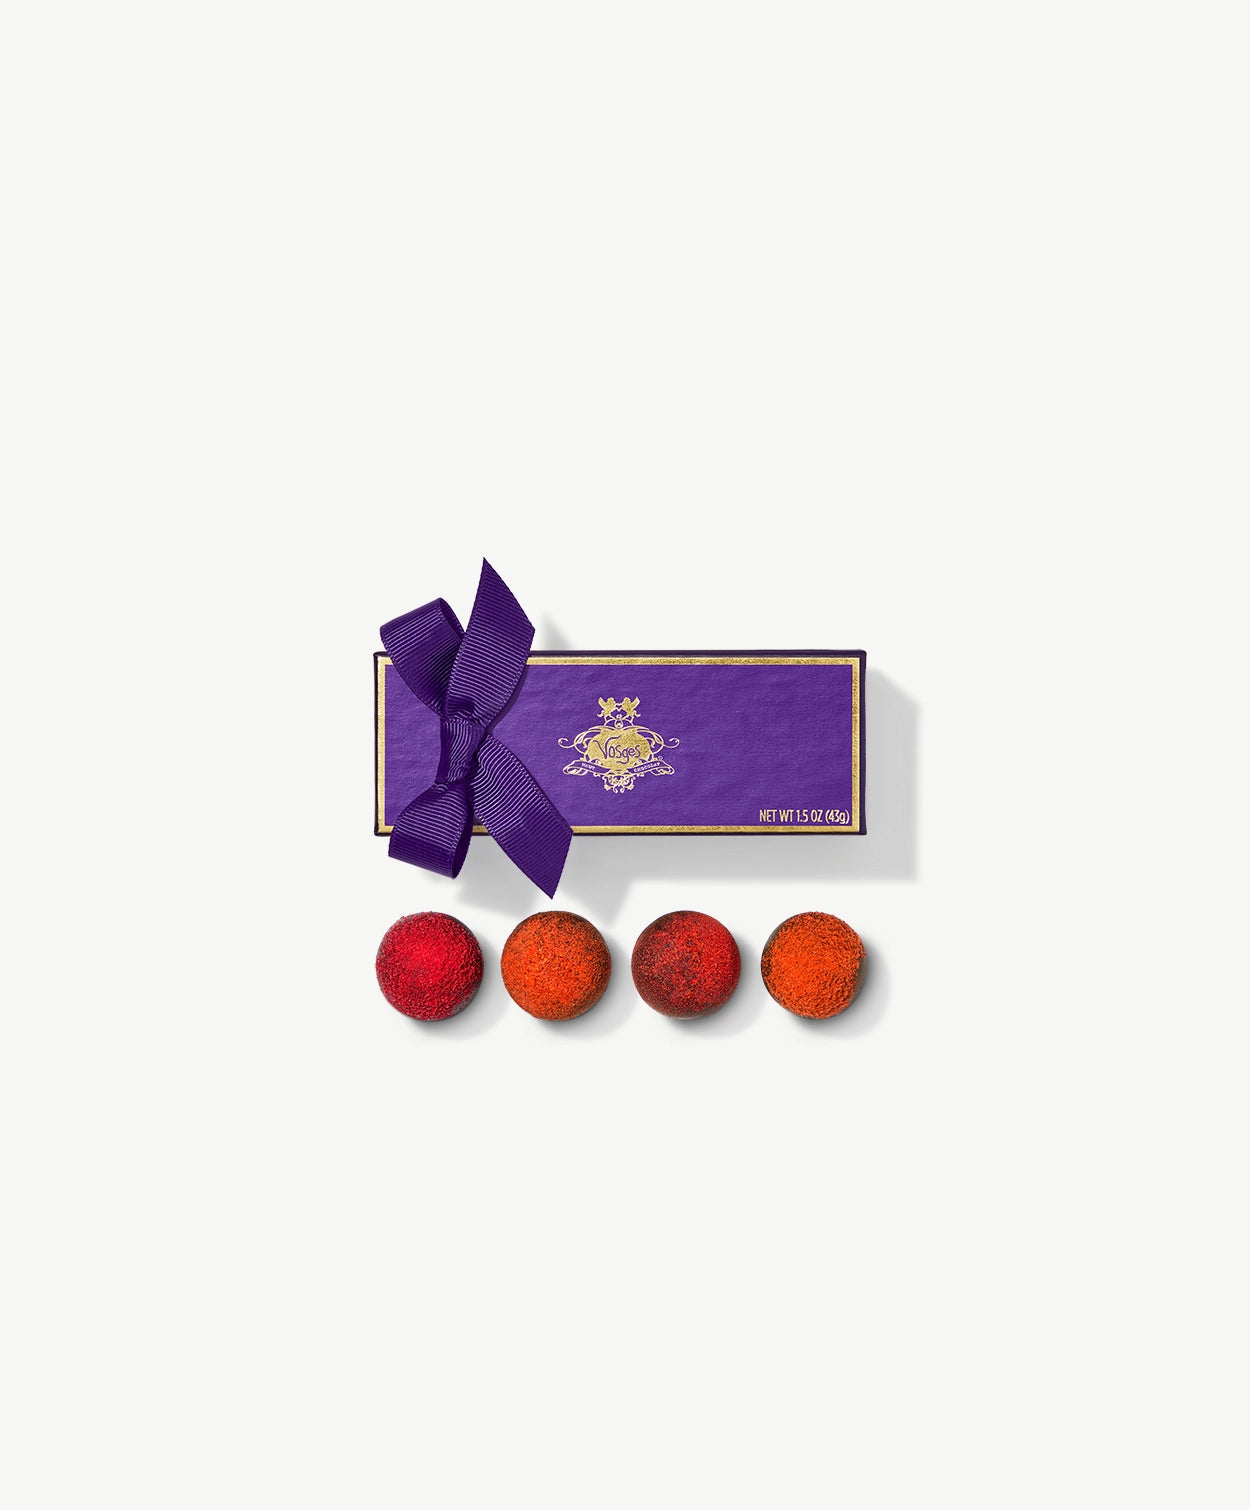 Four Vosges Vegan chocolate truffles adorned with vibrant red raspberry powder and candied orange peel sit infront a rectangular purple candy box embossed with gold foil tied with a purple ribbon bow on a grey background.